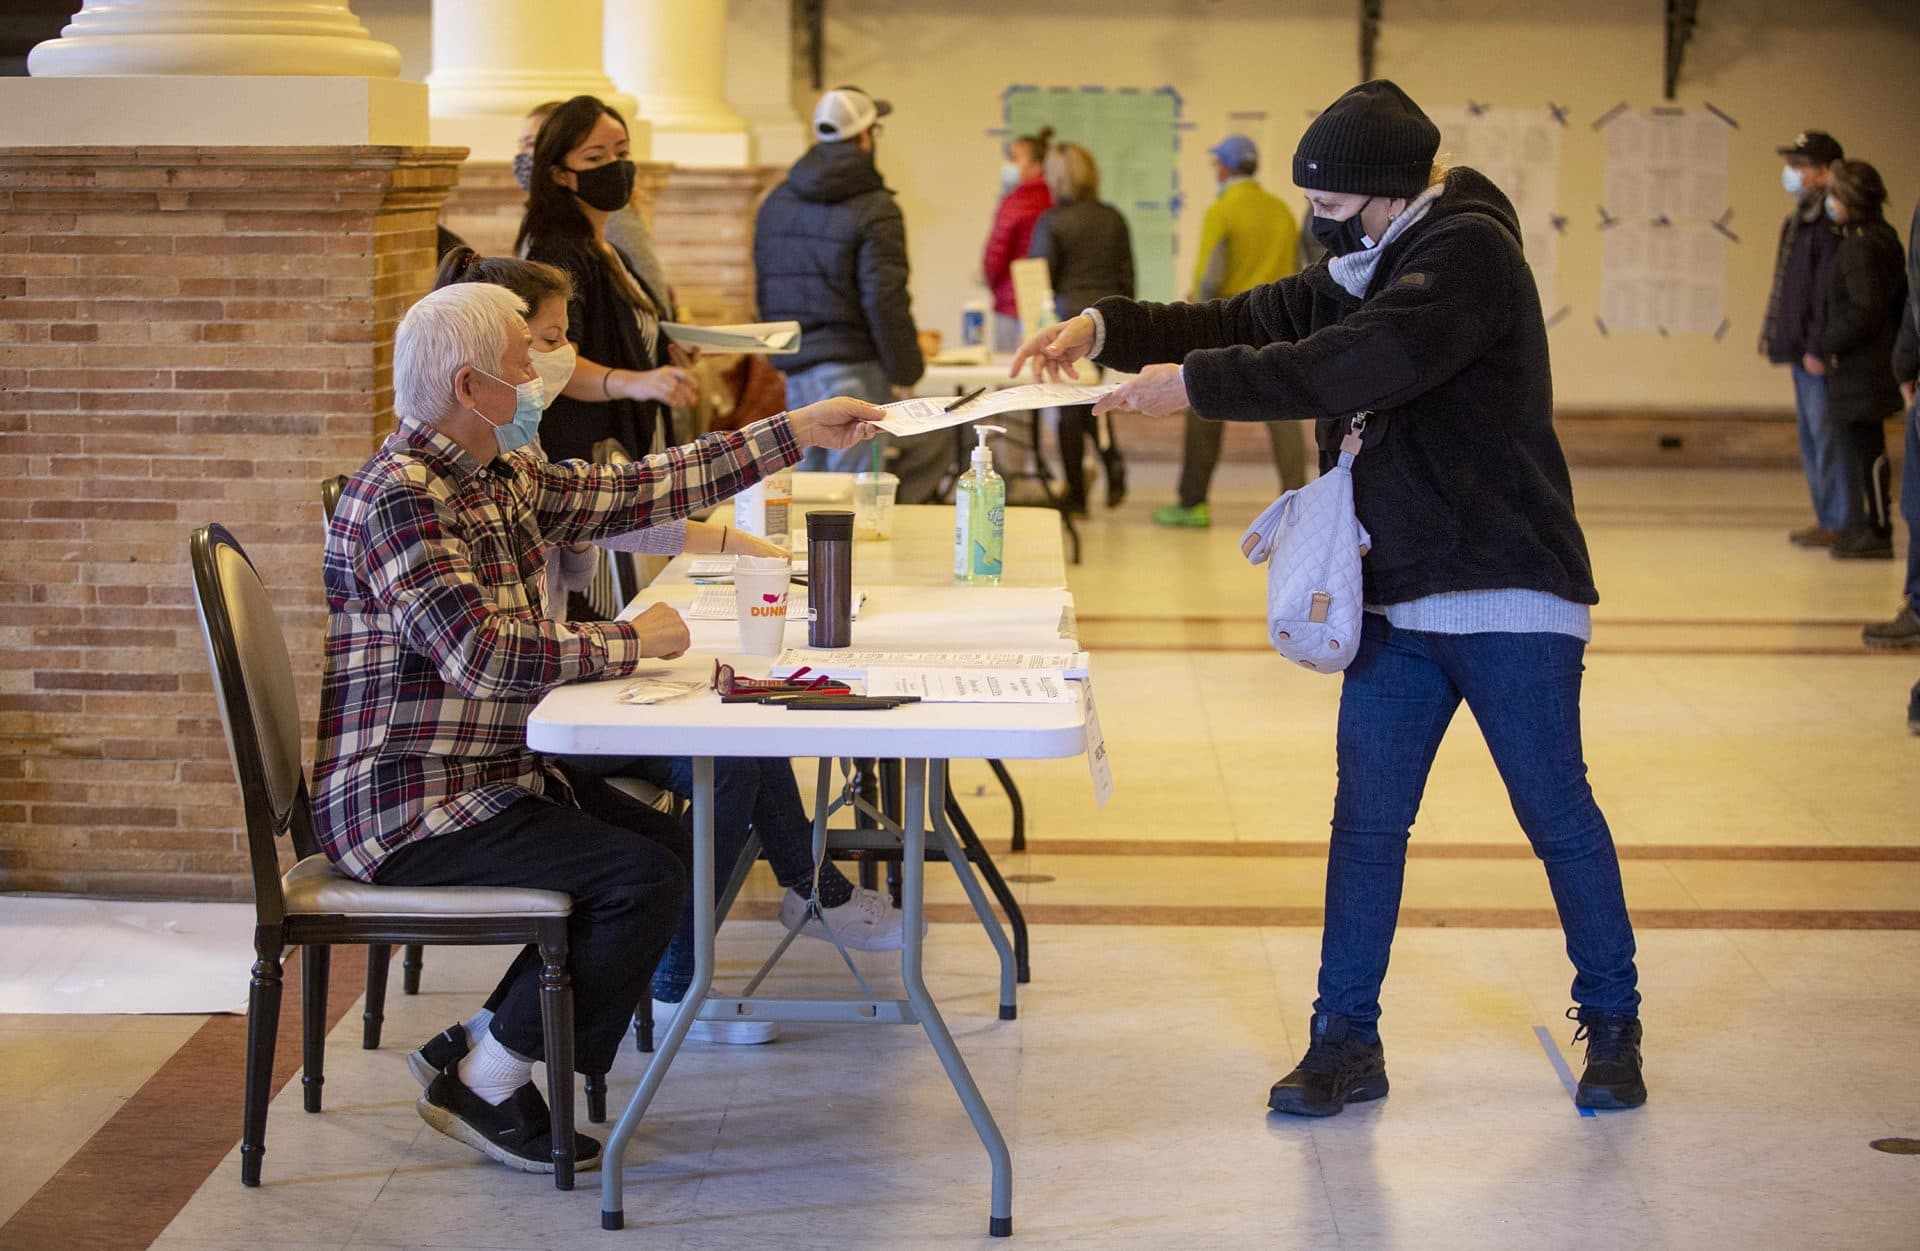 A voter keeps social distancing in mind as she picks up her ballot at the Boston Public Library. (Robin Lubbock/WBUR)